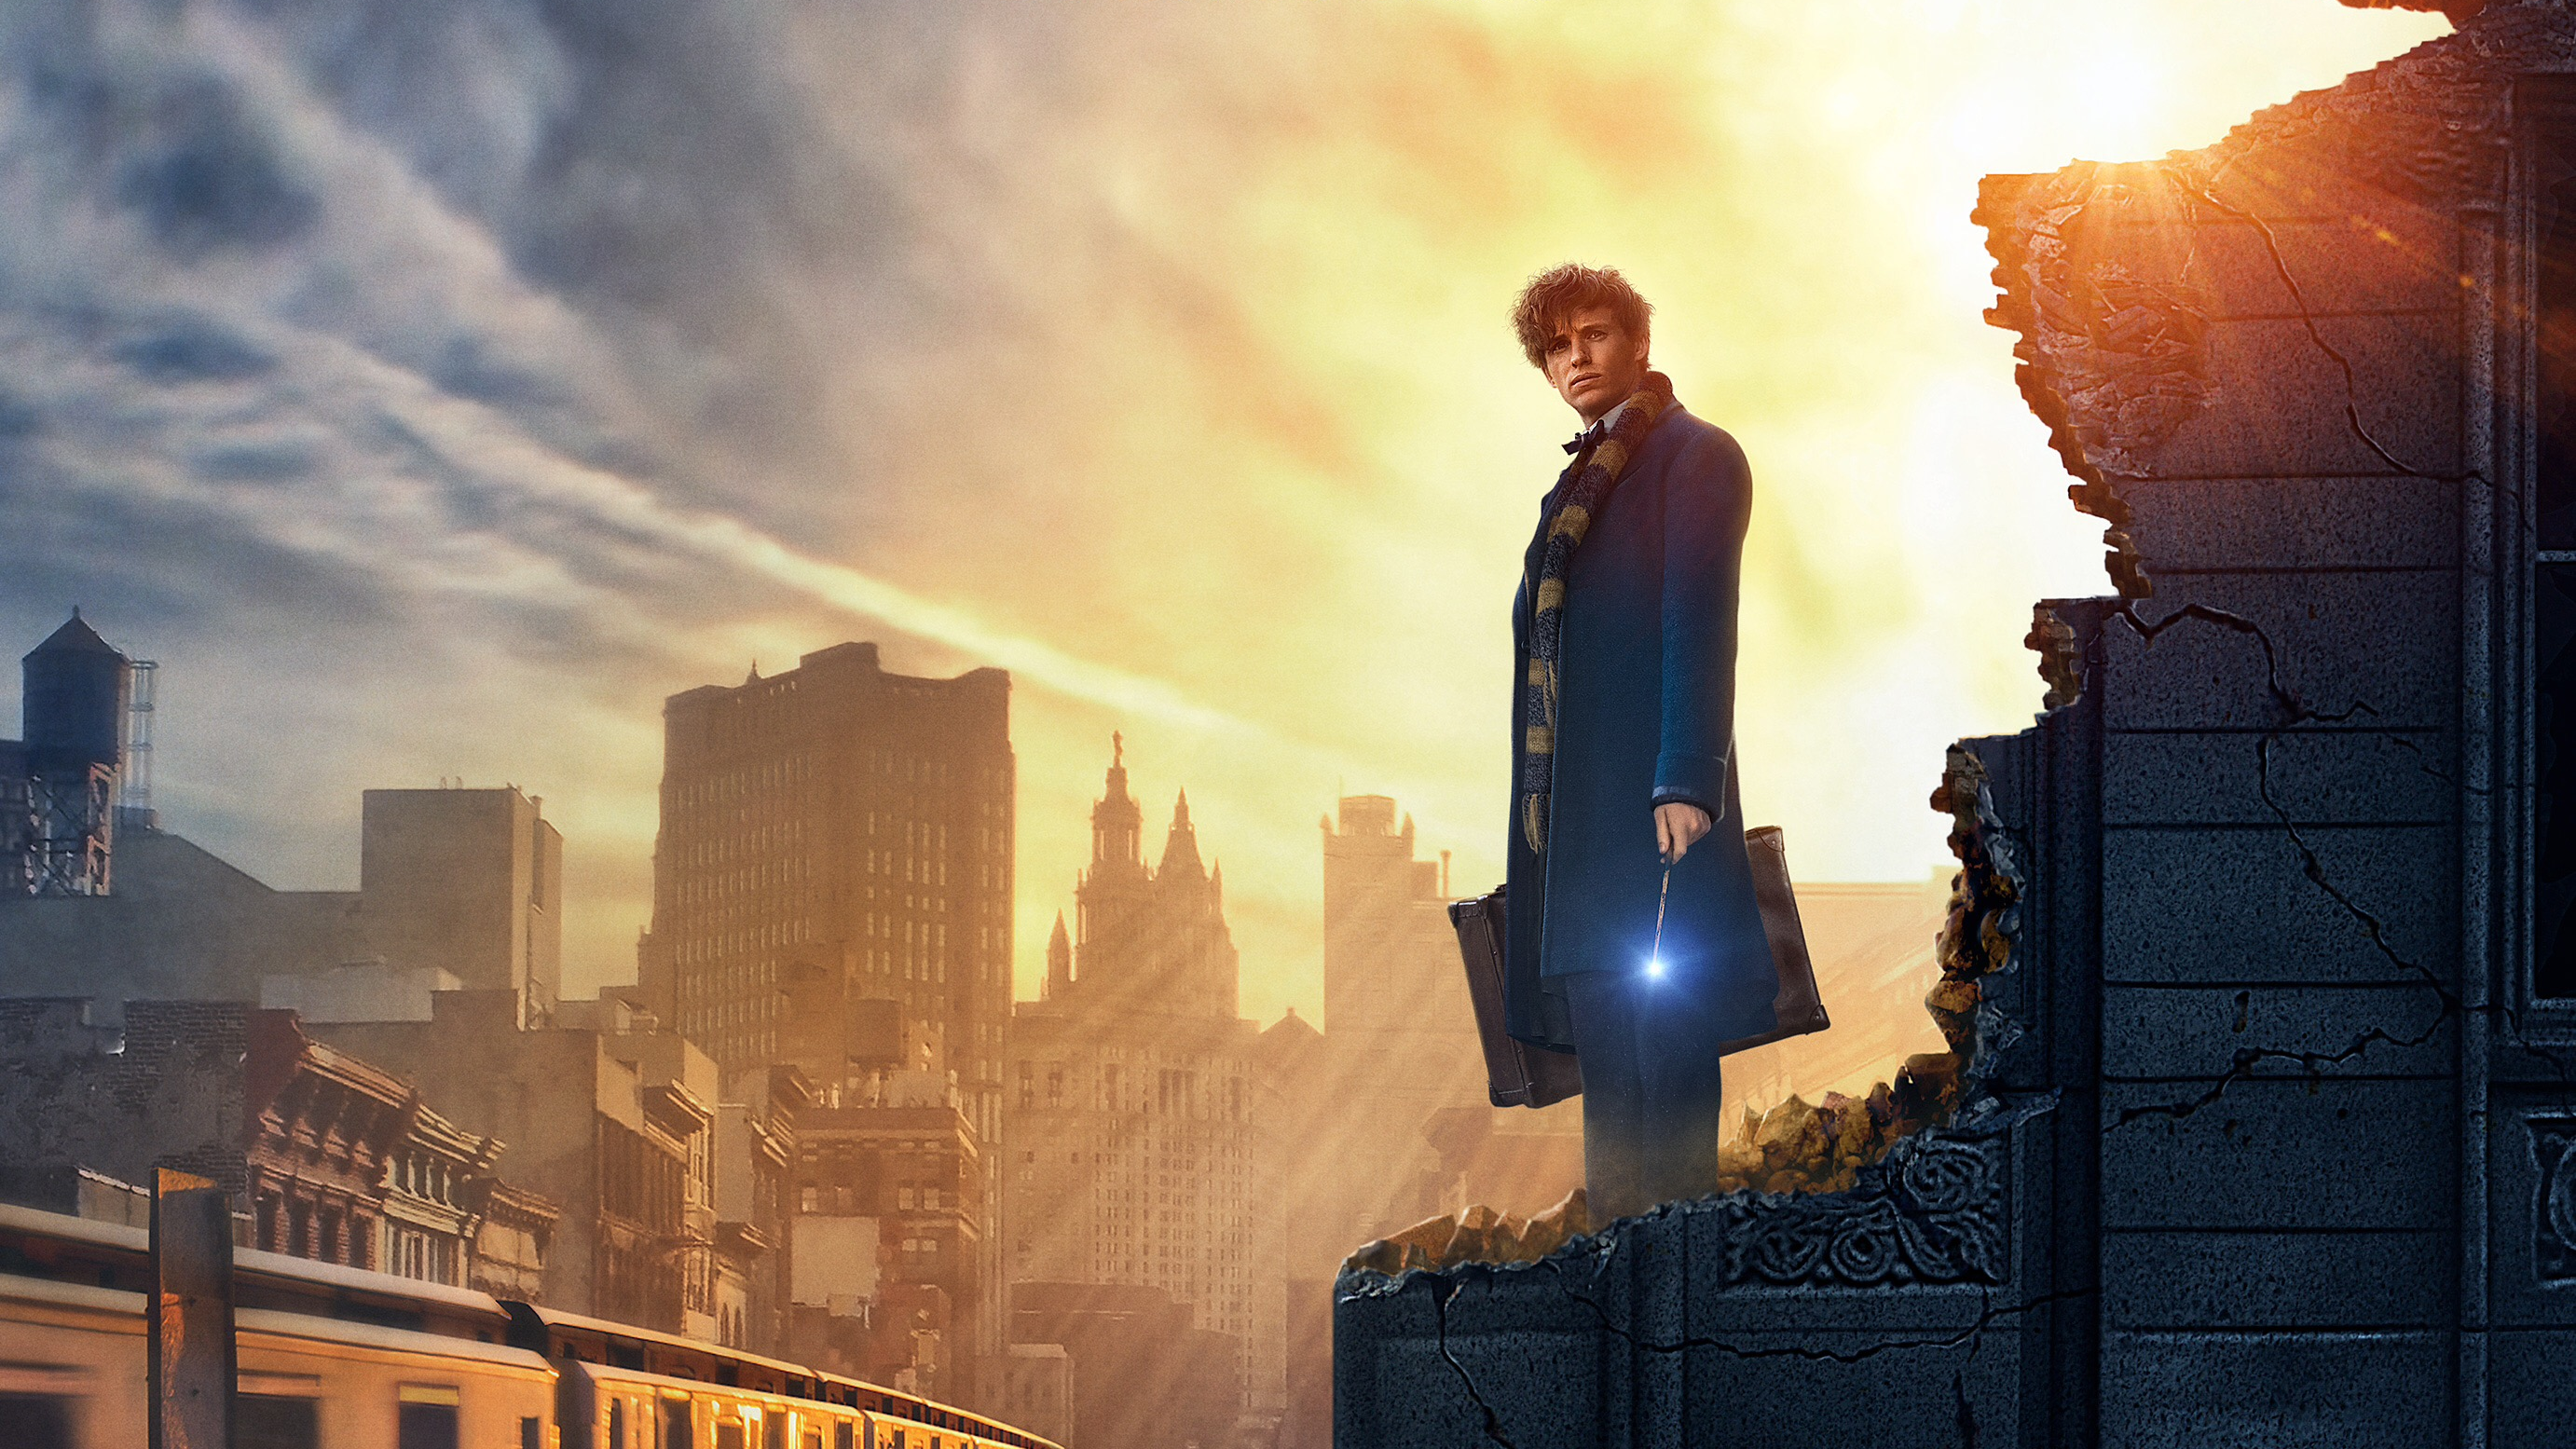 Fantastic Beasts And Where To Find Them Wallpaper On